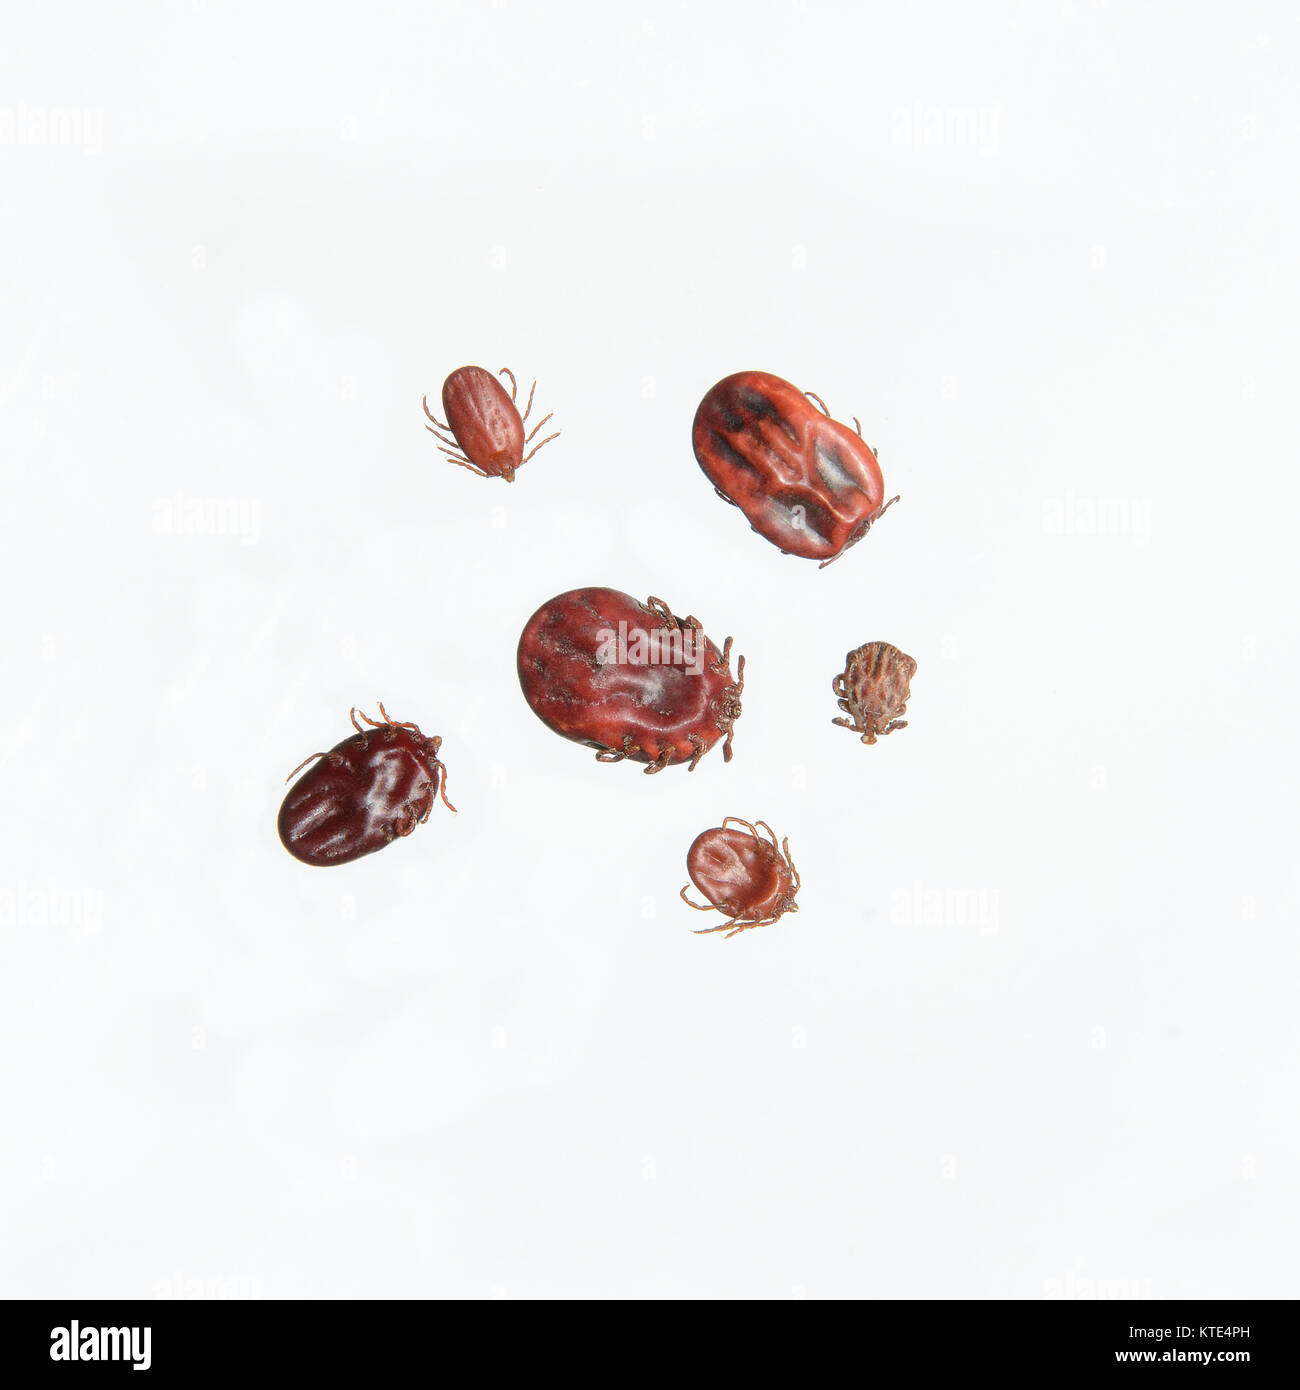 Group of  engorged and unfed small and large hard ticks. These ectoparasites are photographed on white background. Stock Photo